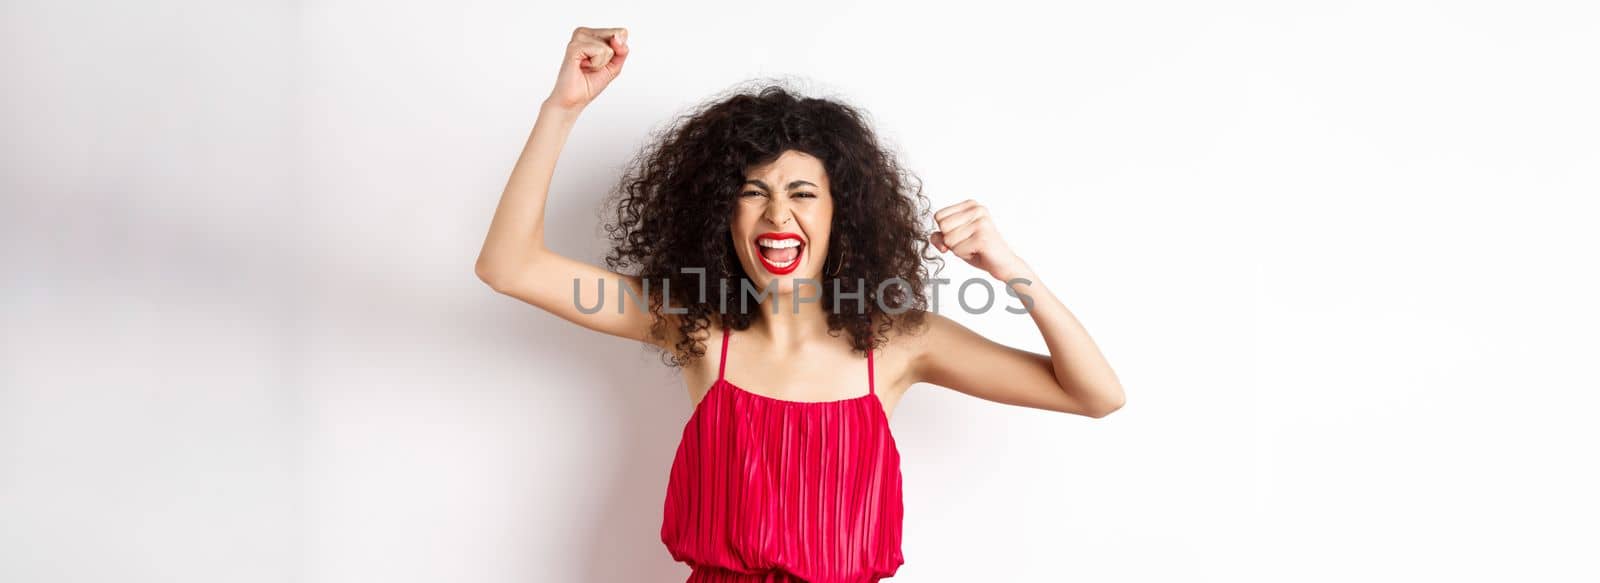 Cheerful emotive woman with curly hair, red dress, raising hands up and chanting, rooting for team, shouting wanting to win, standing on white background.